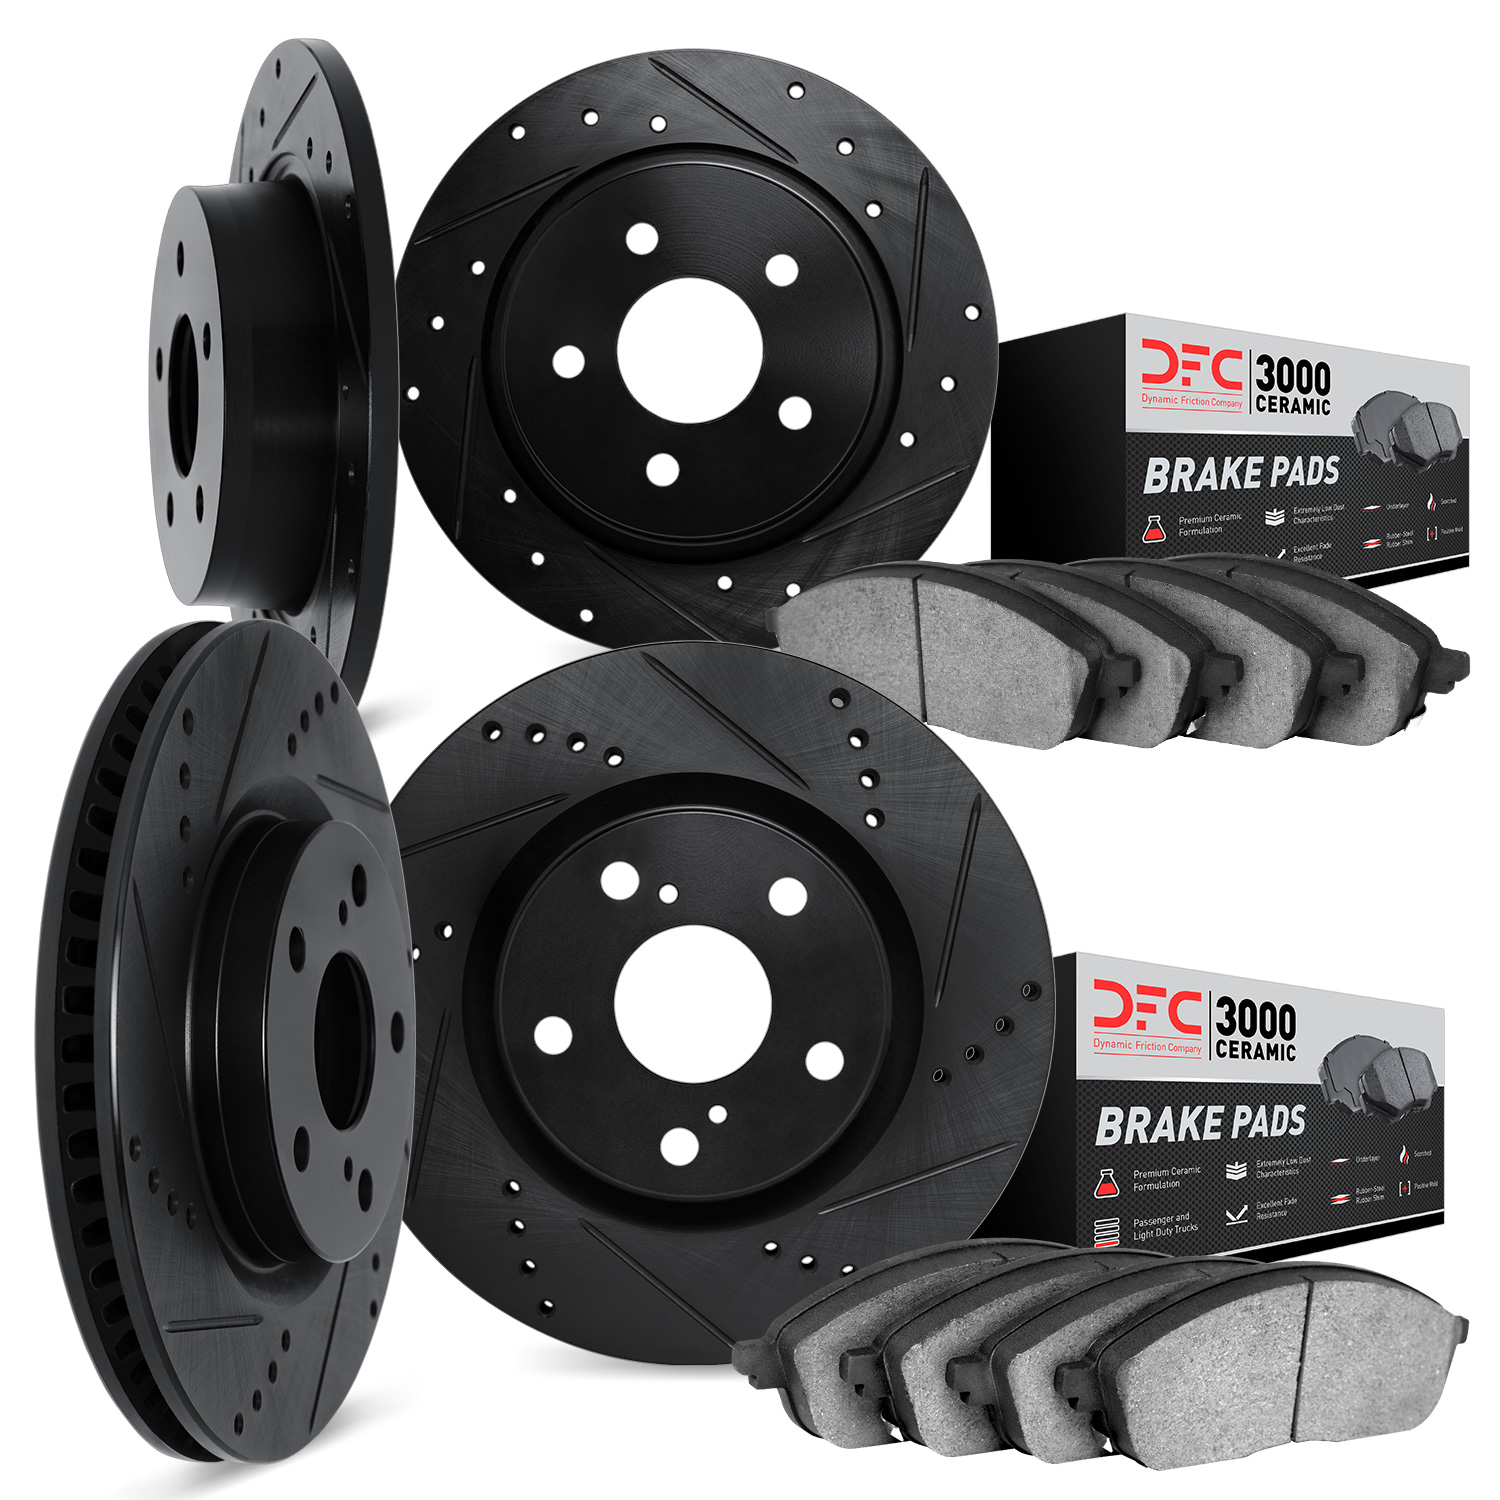 8304-40015 Drilled/Slotted Brake Rotors with 3000-Series Ceramic Brake Pads Kit [Black], 2004-2005 Mopar, Position: Front and Re